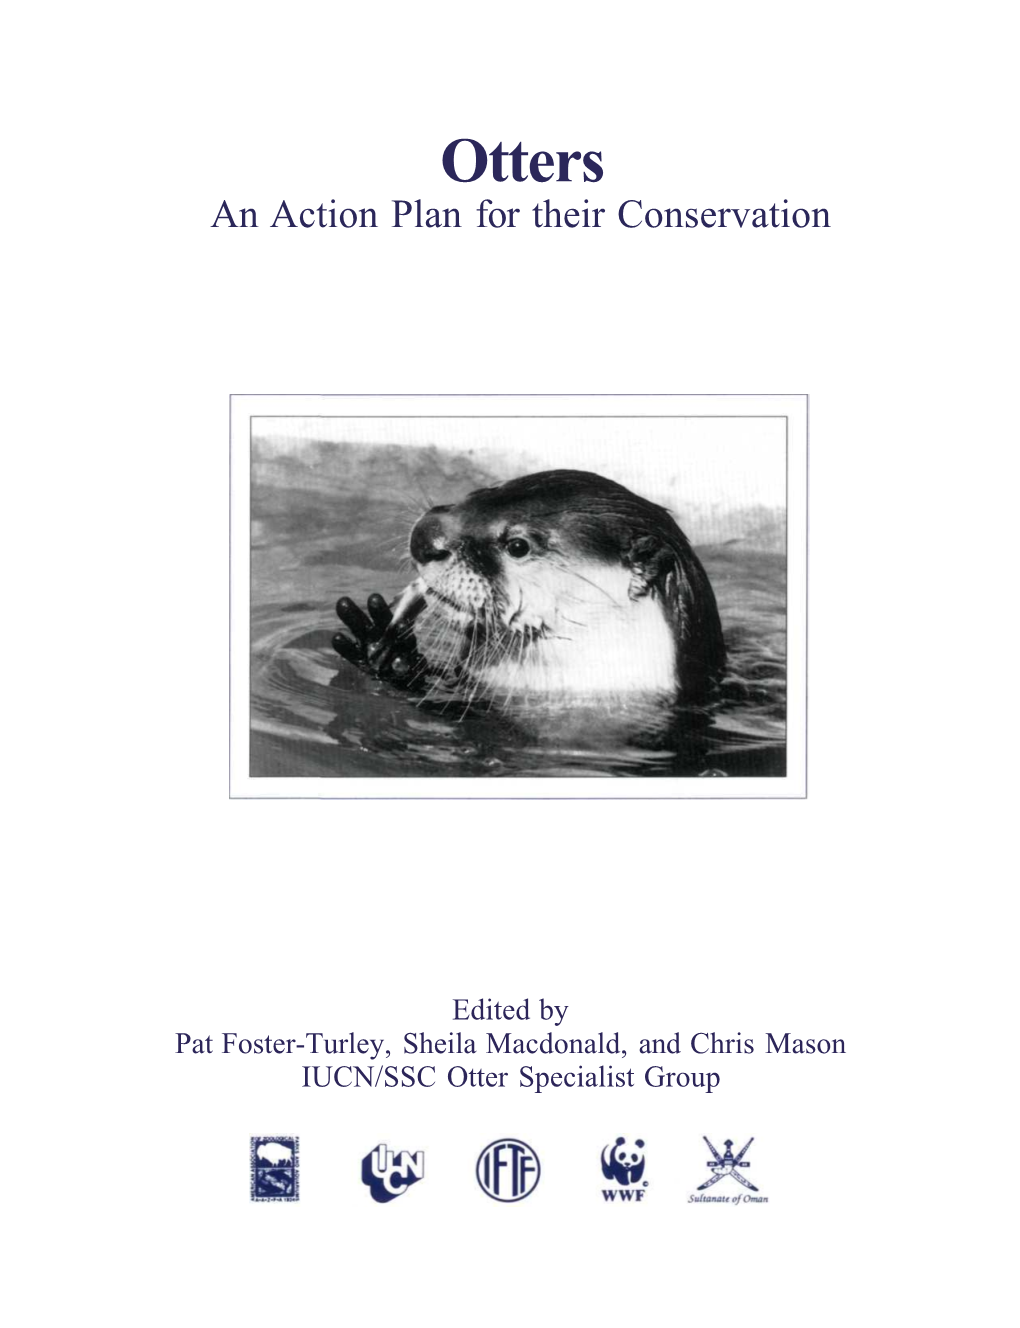 Otters an Action Plan for Their Conservation